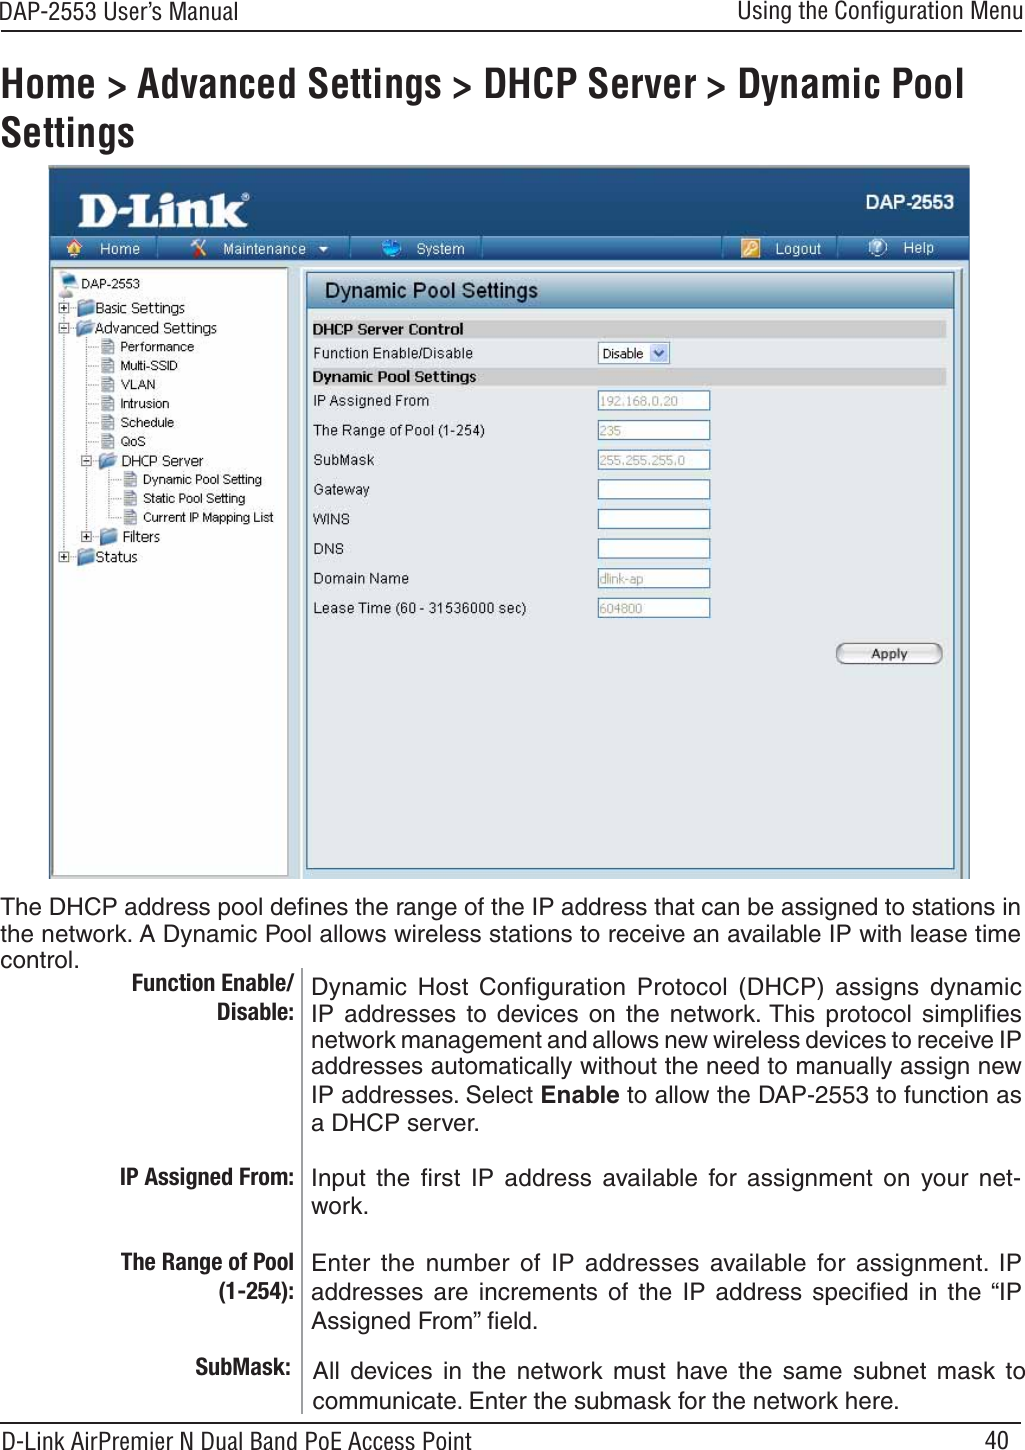 40DAP-2553 User’s ManualD-Link AirPremier N Dual Band PoE Access PointUsing the Conﬁguration MenuHome &gt; Advanced Settings &gt; DHCP Server &gt; Dynamic Pool SettingsFunction Enable/Disable:Dynamic Host Conﬁguration Protocol (DHCP) assigns dynamicIP addresses to devices on the network. This protocol simpliﬁesnetwork management and allows new wireless devices to receive IPaddresses automatically without the need to manually assign newIP addresses. Select Enable to allow the DAP-2553 to function asa DHCP server.Enter the number of IP addresses available for assignment. IPaddresses are increments of the IP address speciﬁed in the “IPAssigned From” ﬁeld.The Range of Pool (1-254):Input the ﬁrst IP address available for assignment on your net-work.SubMask: All devices in the network must have the same subnet mask tocommunicate. Enter the submask for the network here.The DHCP address pool deﬁnes the range of the IP address that can be assigned to stations inthe network. A Dynamic Pool allows wireless stations to receive an available IP with lease timecontrol.IP Assigned From: